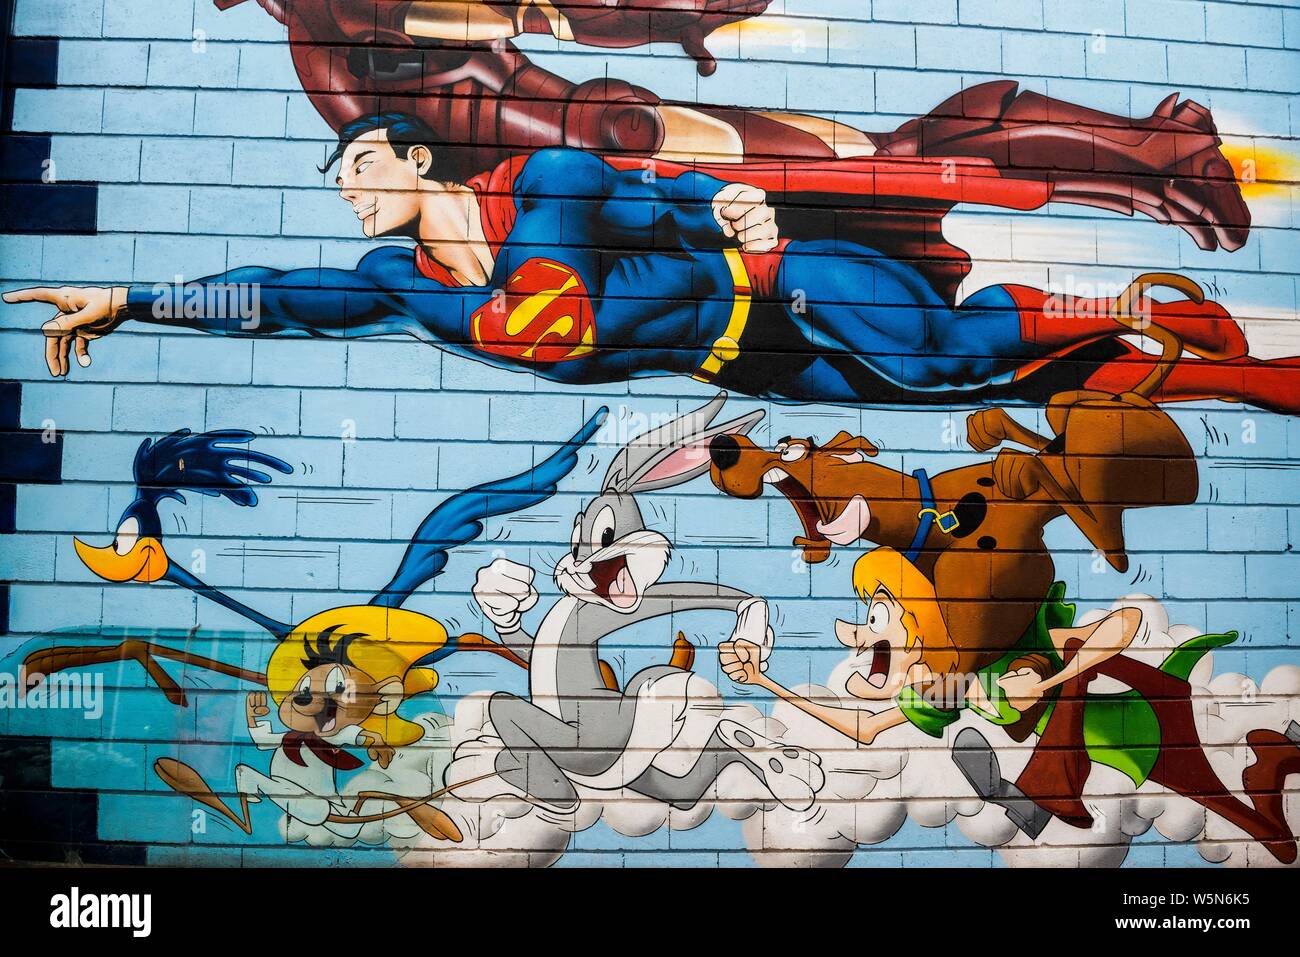 Painted house wall with cartoon characters, Speedy Conzales, Bugs Bunny, Superman, Graffiti, Porte de Clignancourt, Paris, France Stock Photo